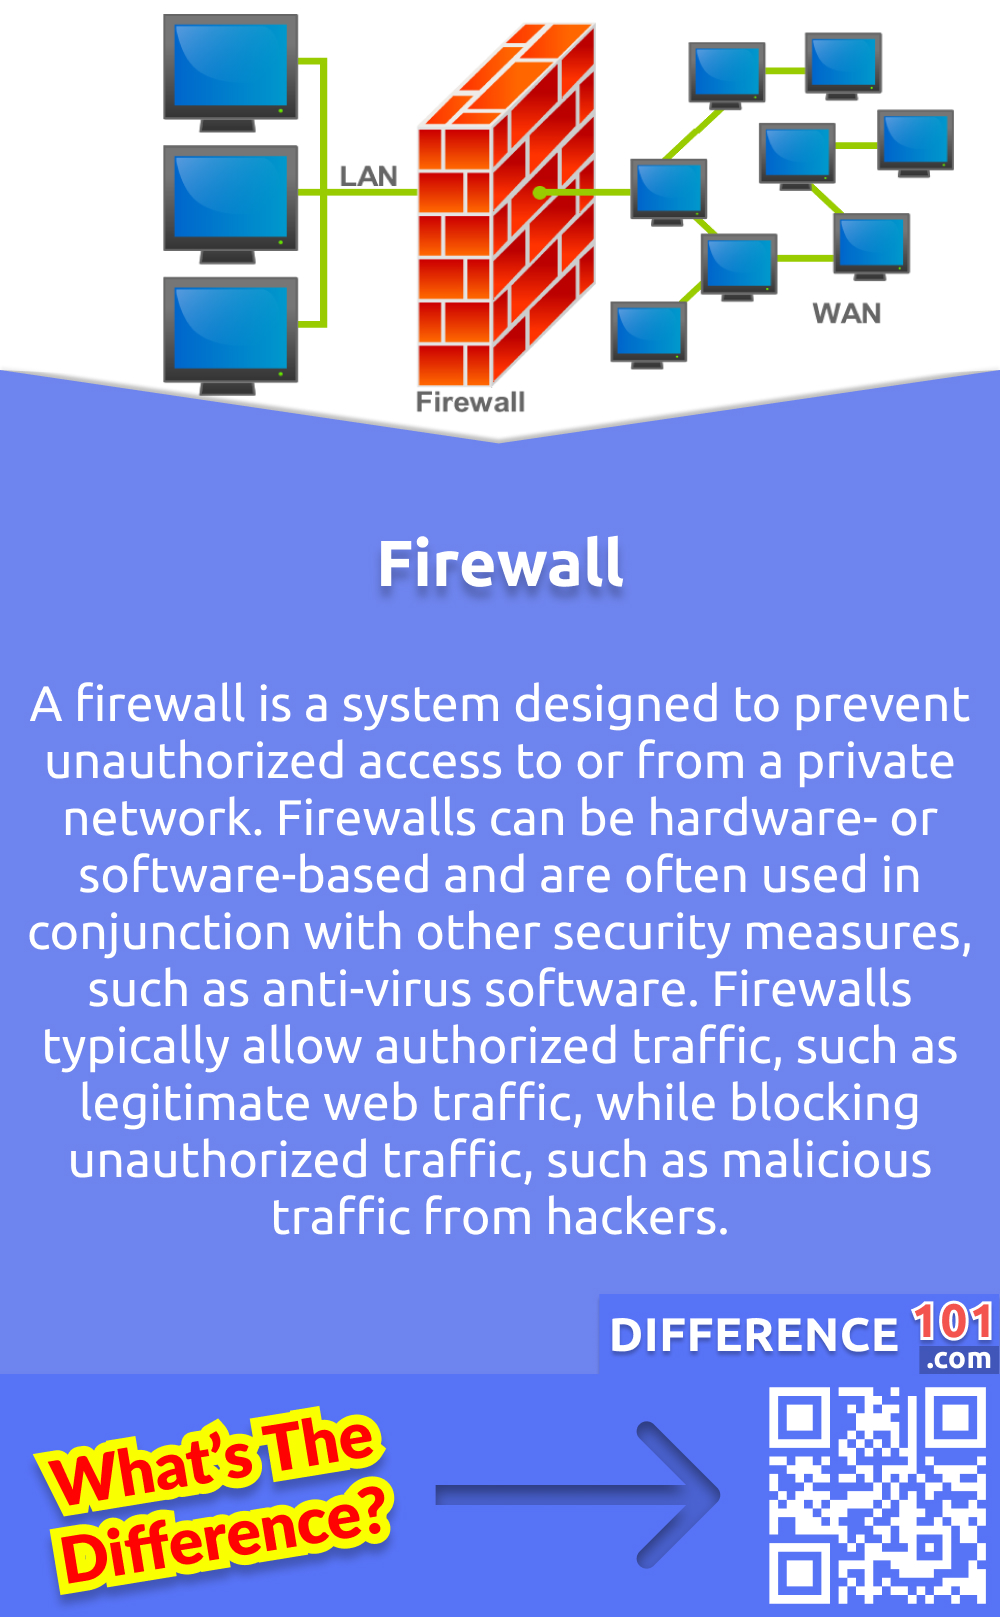 What Is Firewall? A firewall is a system designed to prevent unauthorized access to or from a private network. Firewalls can be hardware- or software-based and are often used in conjunction with other security measures, such as anti-virus software. Firewalls typically allow authorized traffic, such as legitimate web traffic, while blocking unauthorized traffic, such as malicious traffic from hackers.
